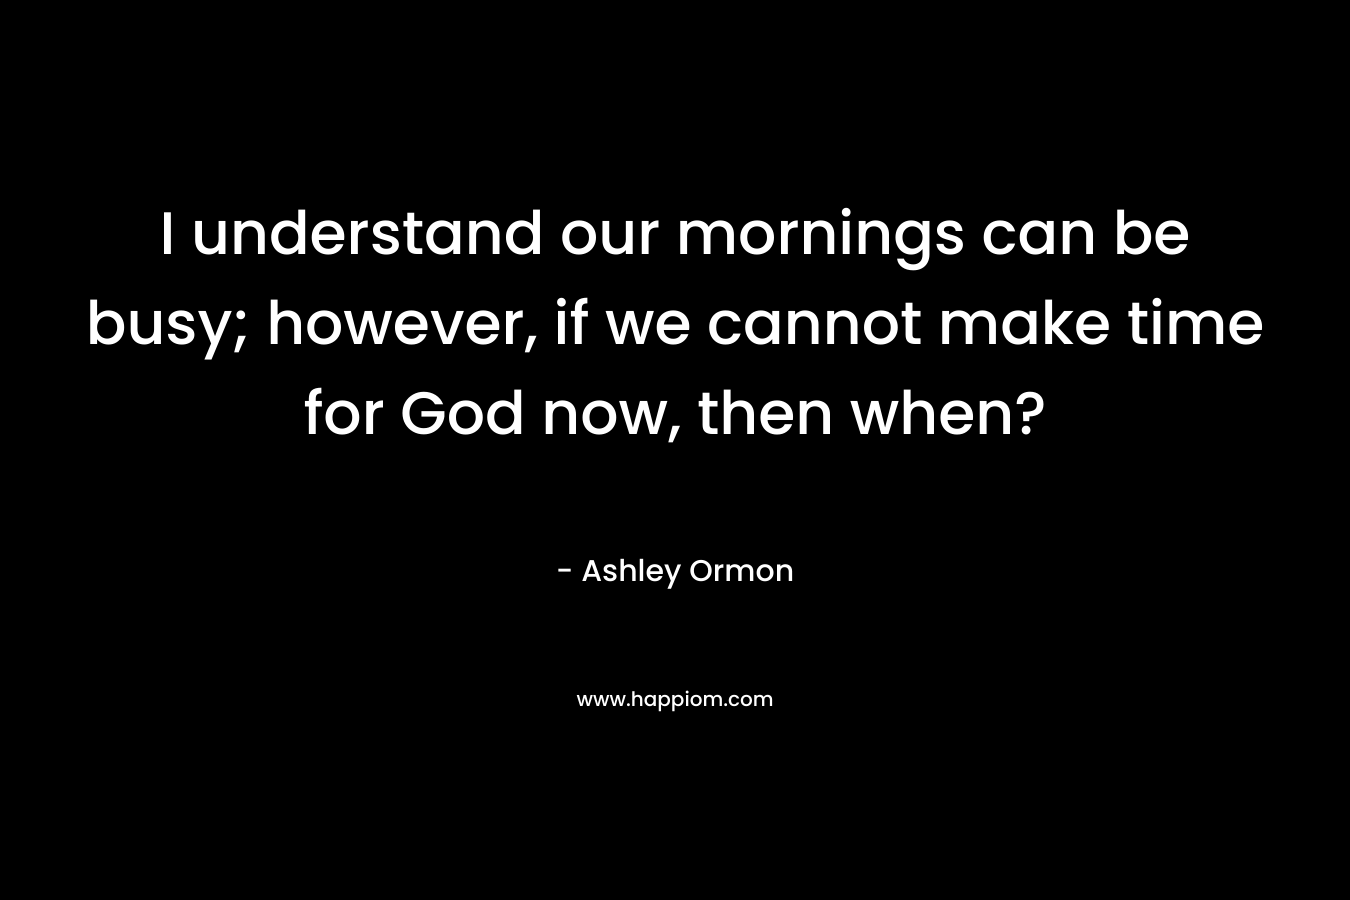 I understand our mornings can be busy; however, if we cannot make time for God now, then when?